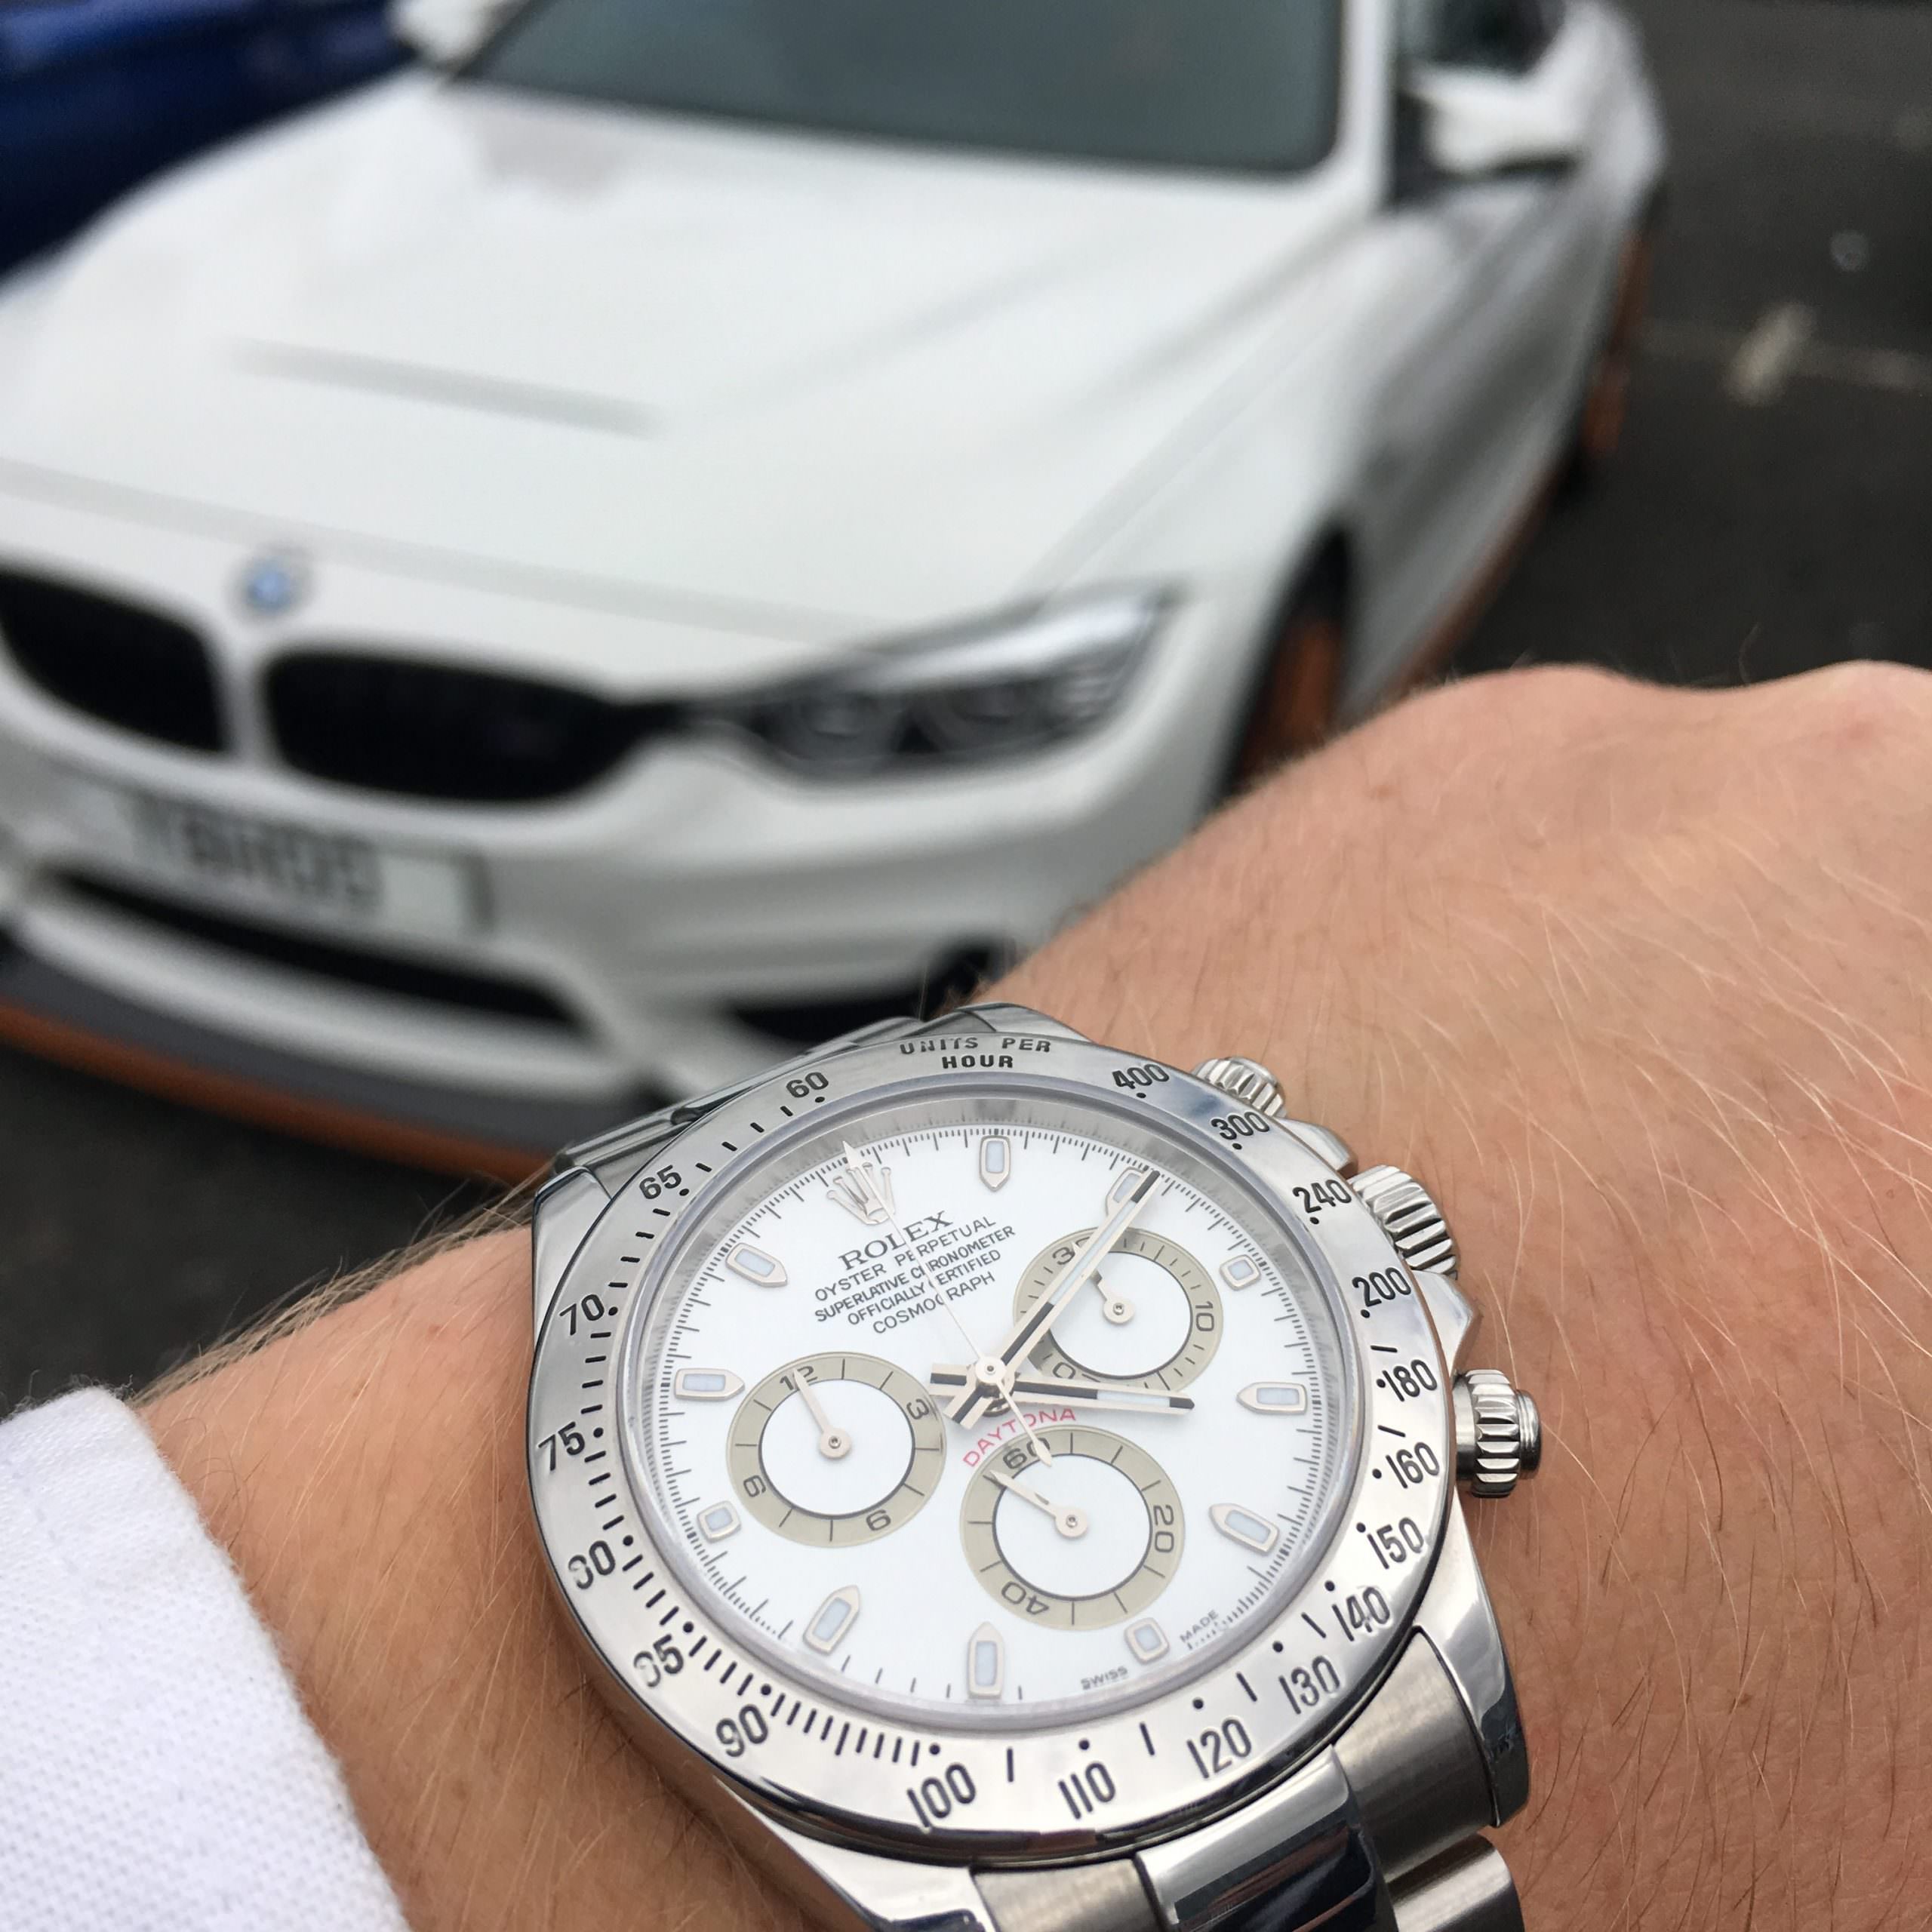 Which Stainless Steel Sports Rolex is 